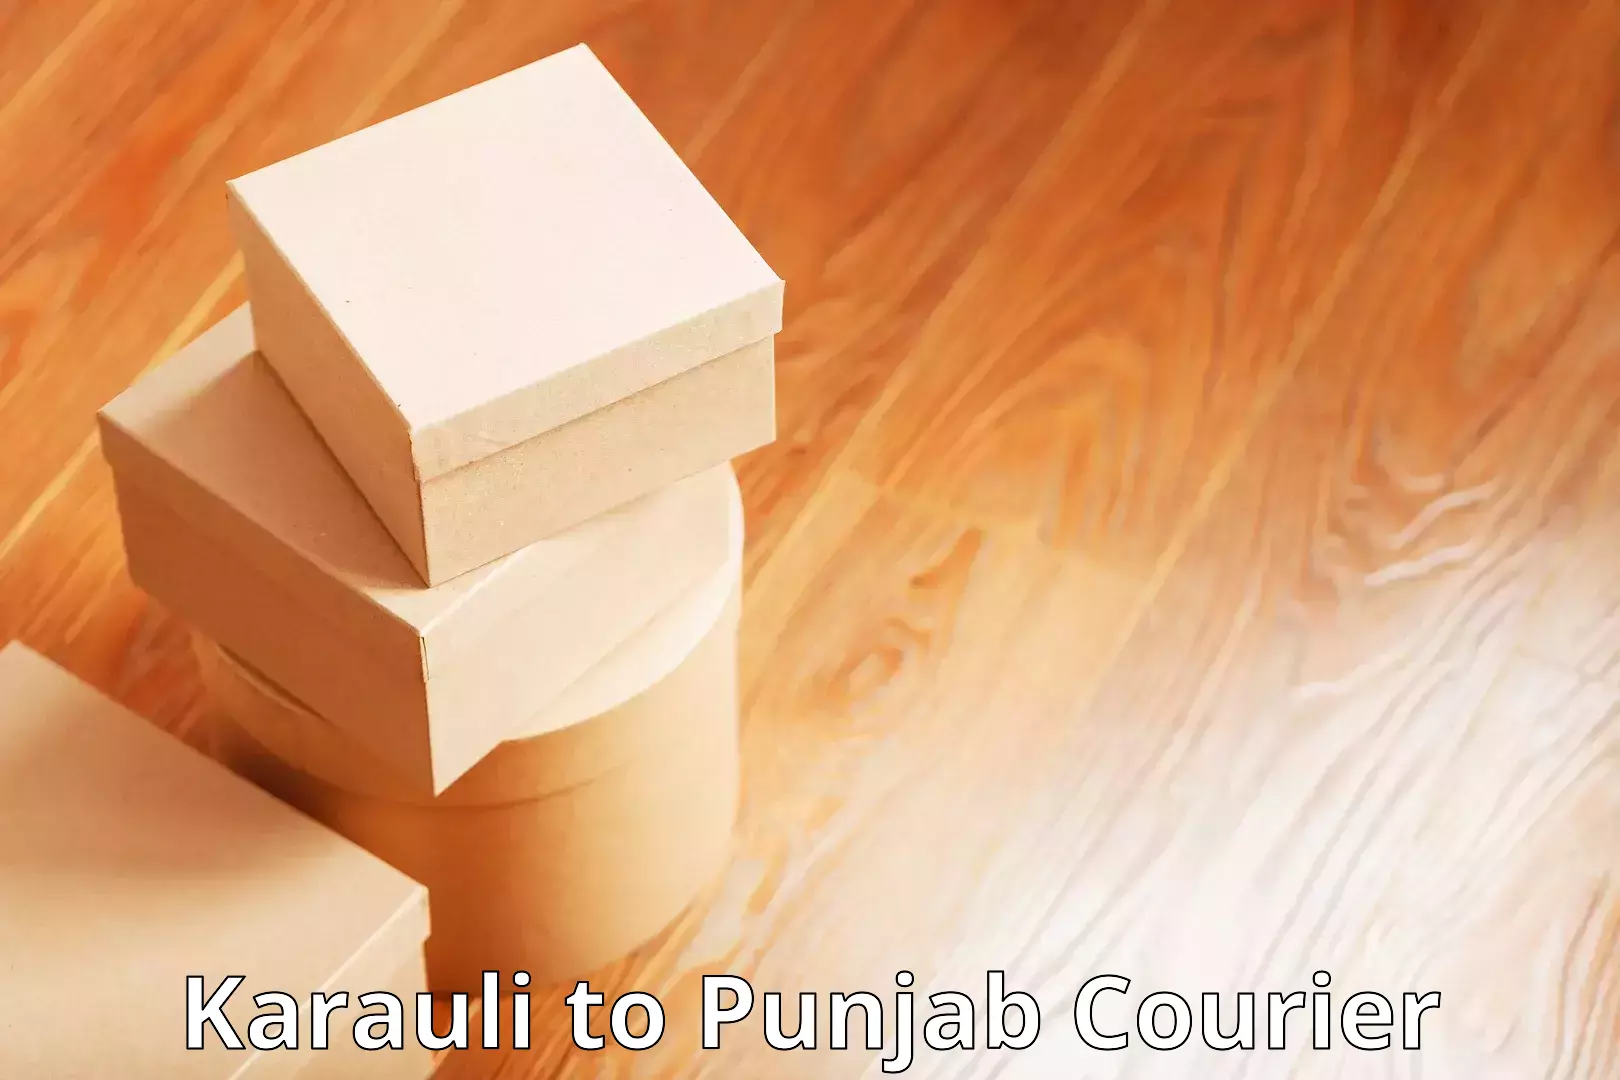 Full-service courier options in Karauli to Amritsar